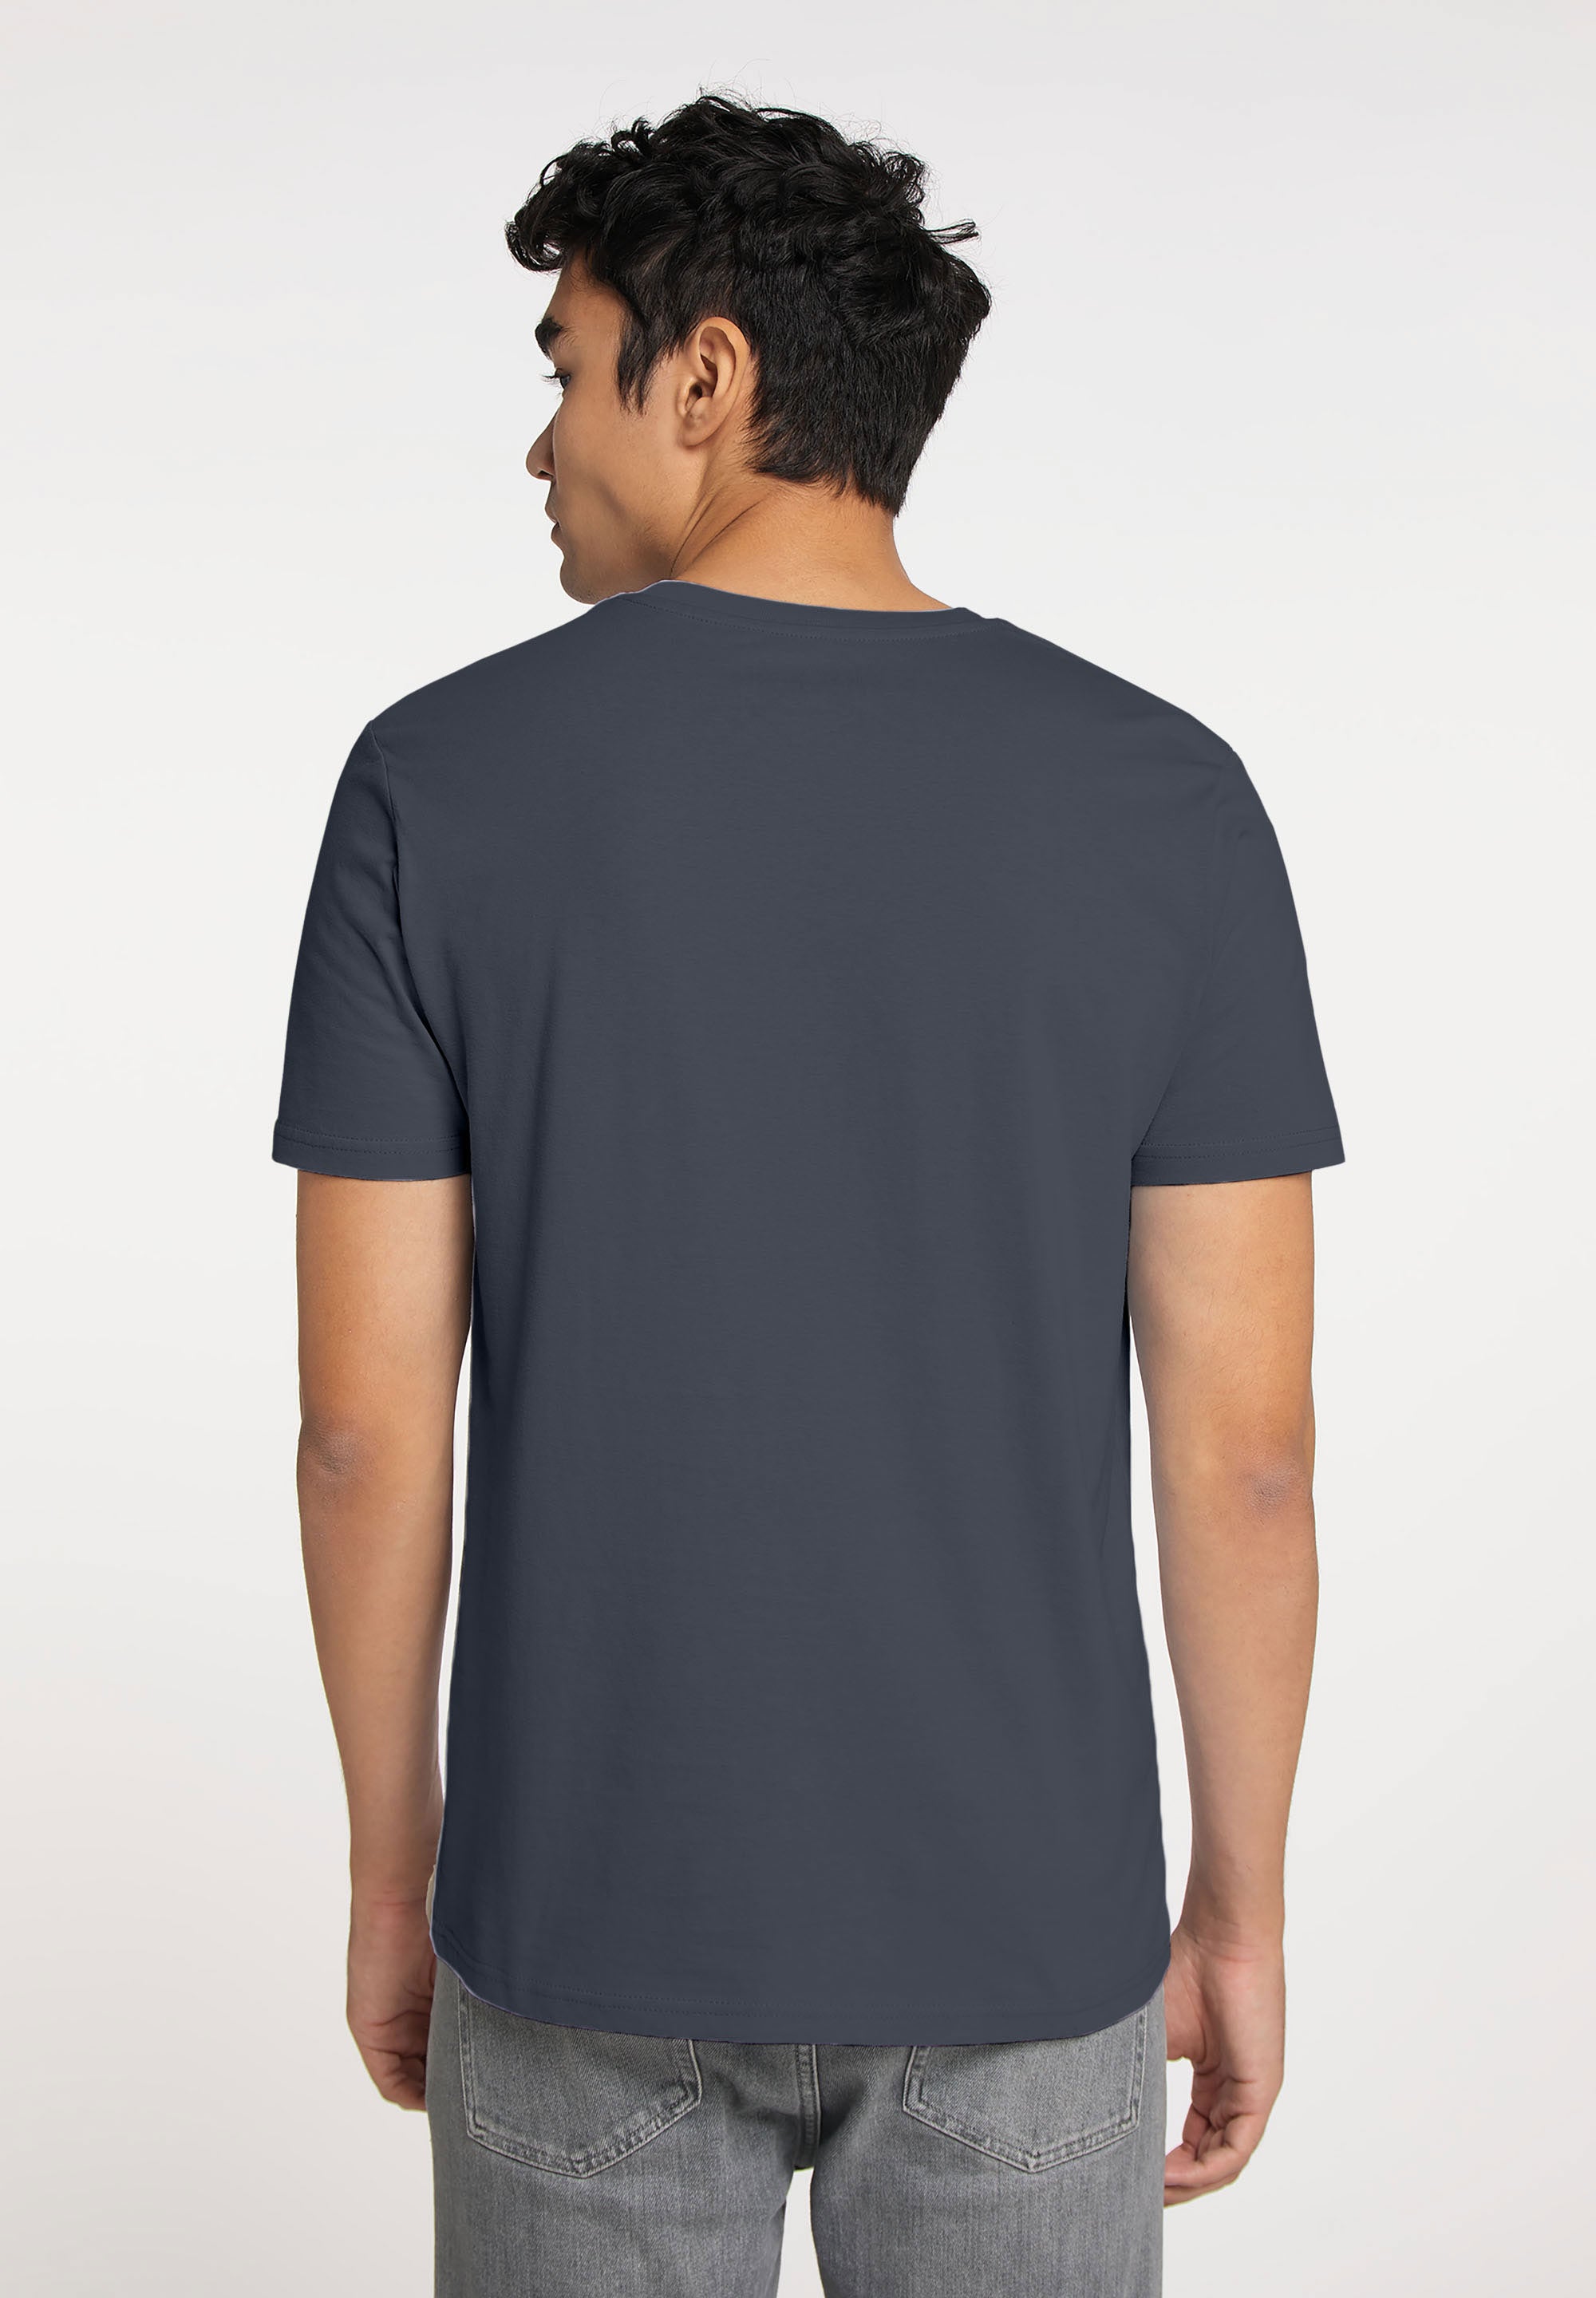 SOMWR REMOTE TEE T-Shirt NVY009